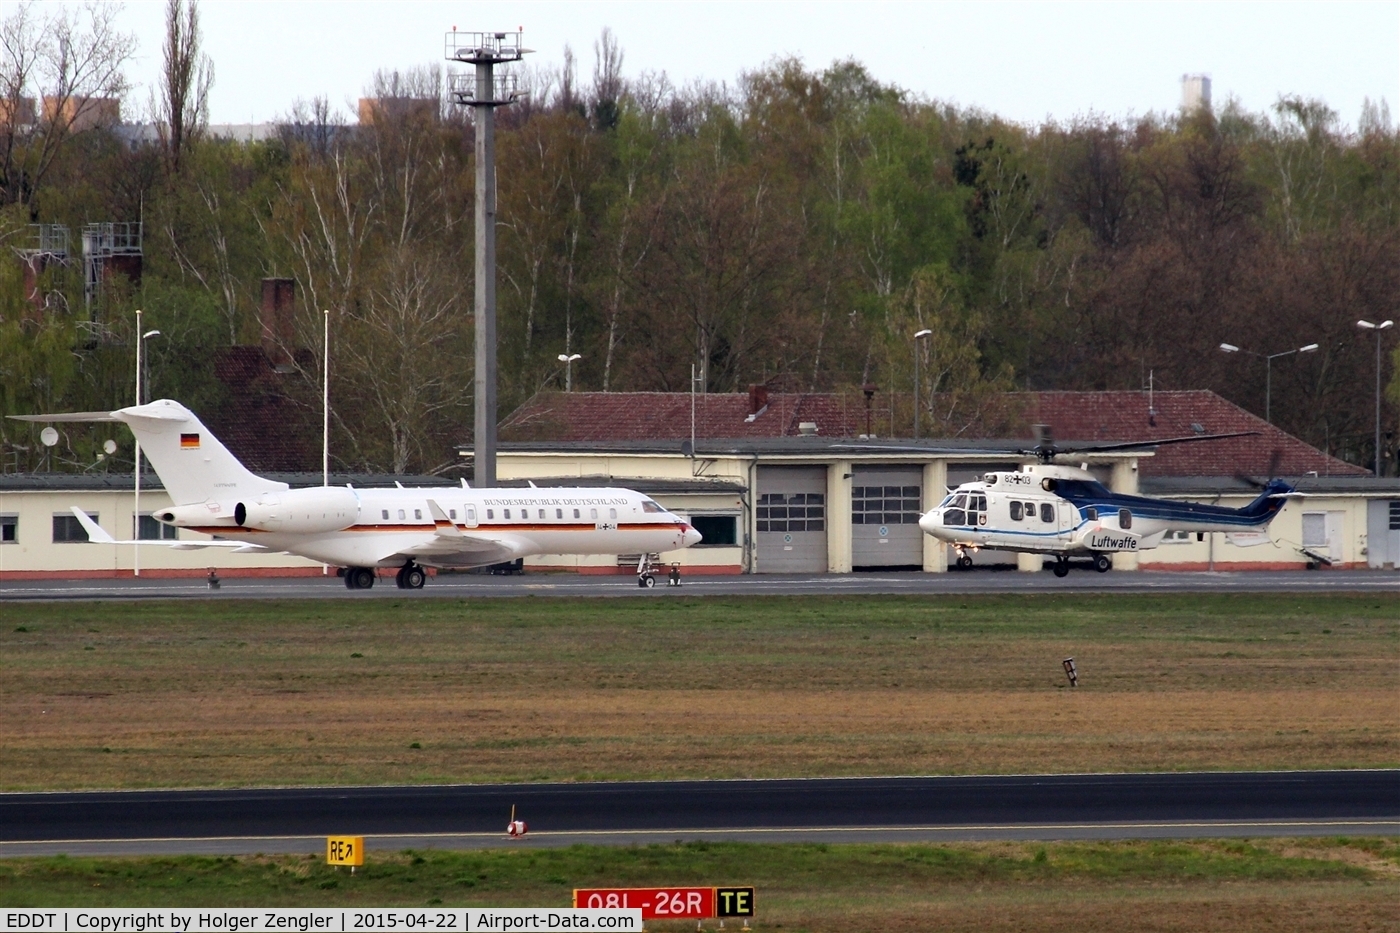 Tegel International Airport (closing in 2011), Berlin Germany (EDDT) - Apron of VIP squad of German Airforce opposite visitor´s terrace